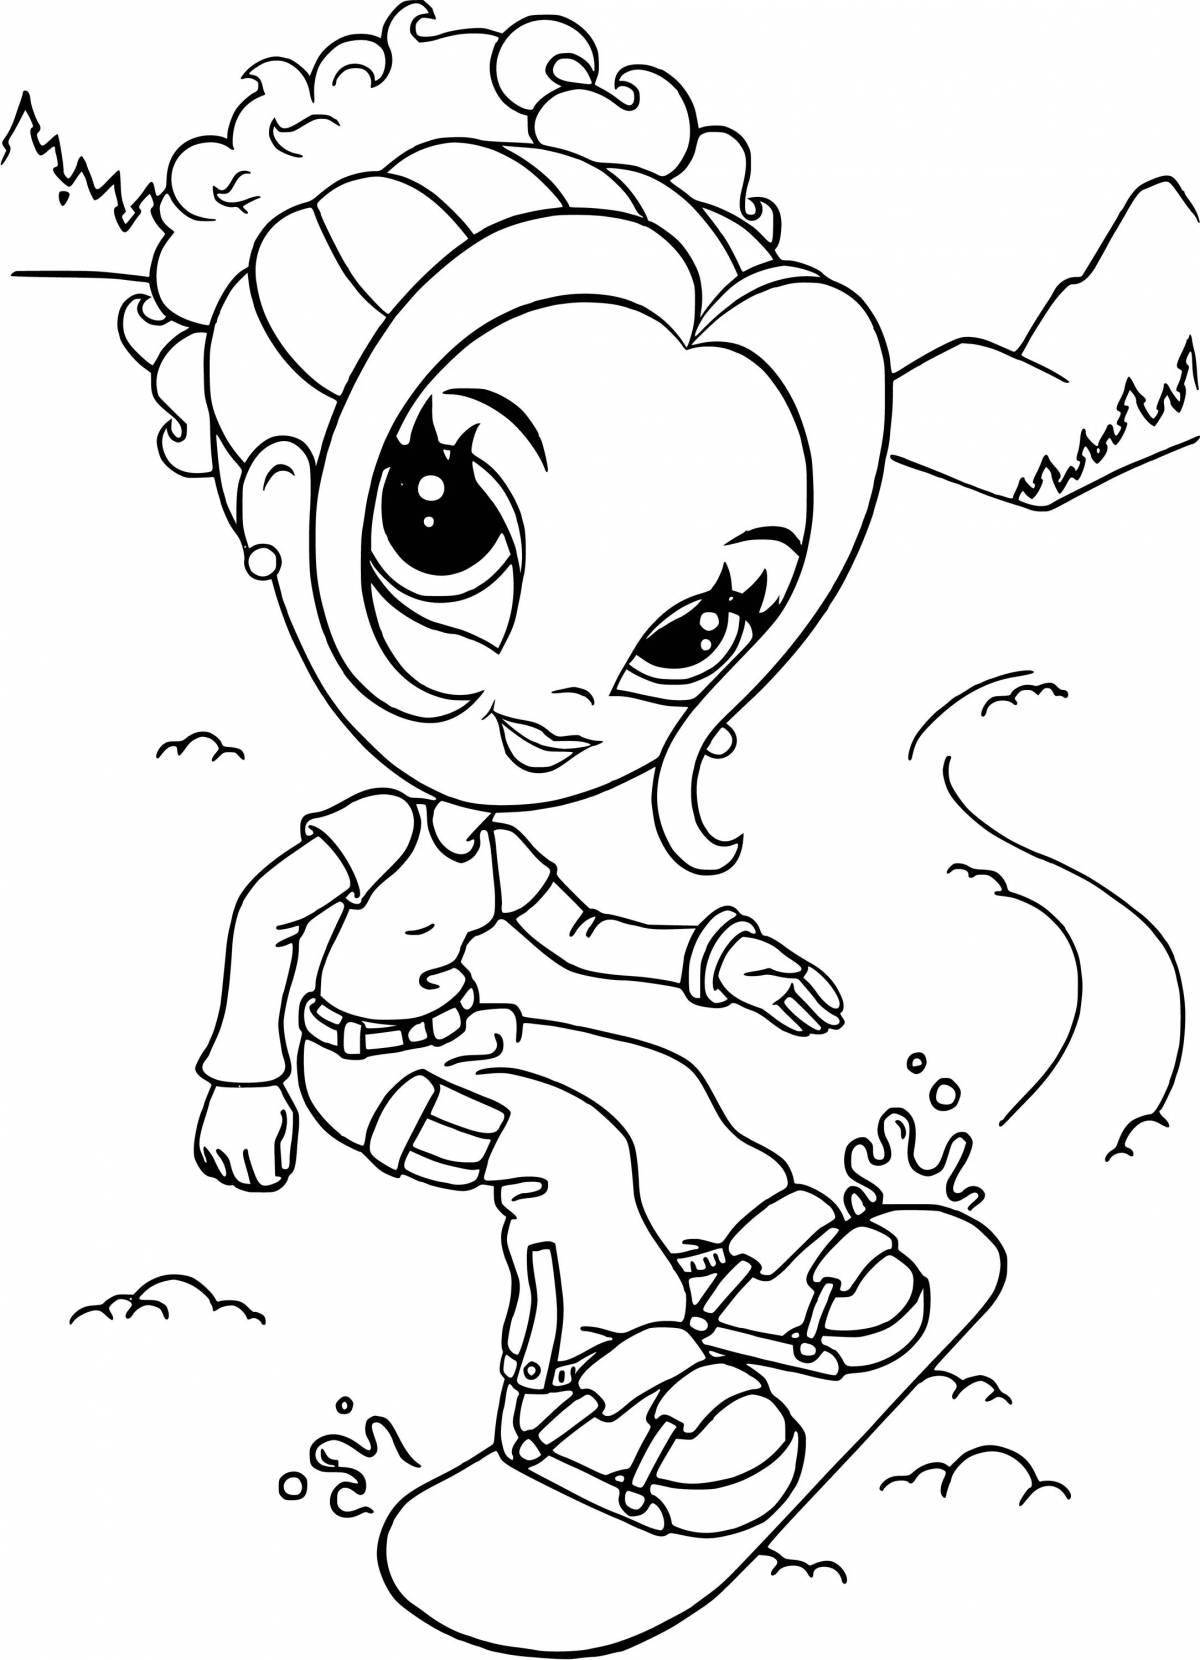 Adorable coloring book popular with children